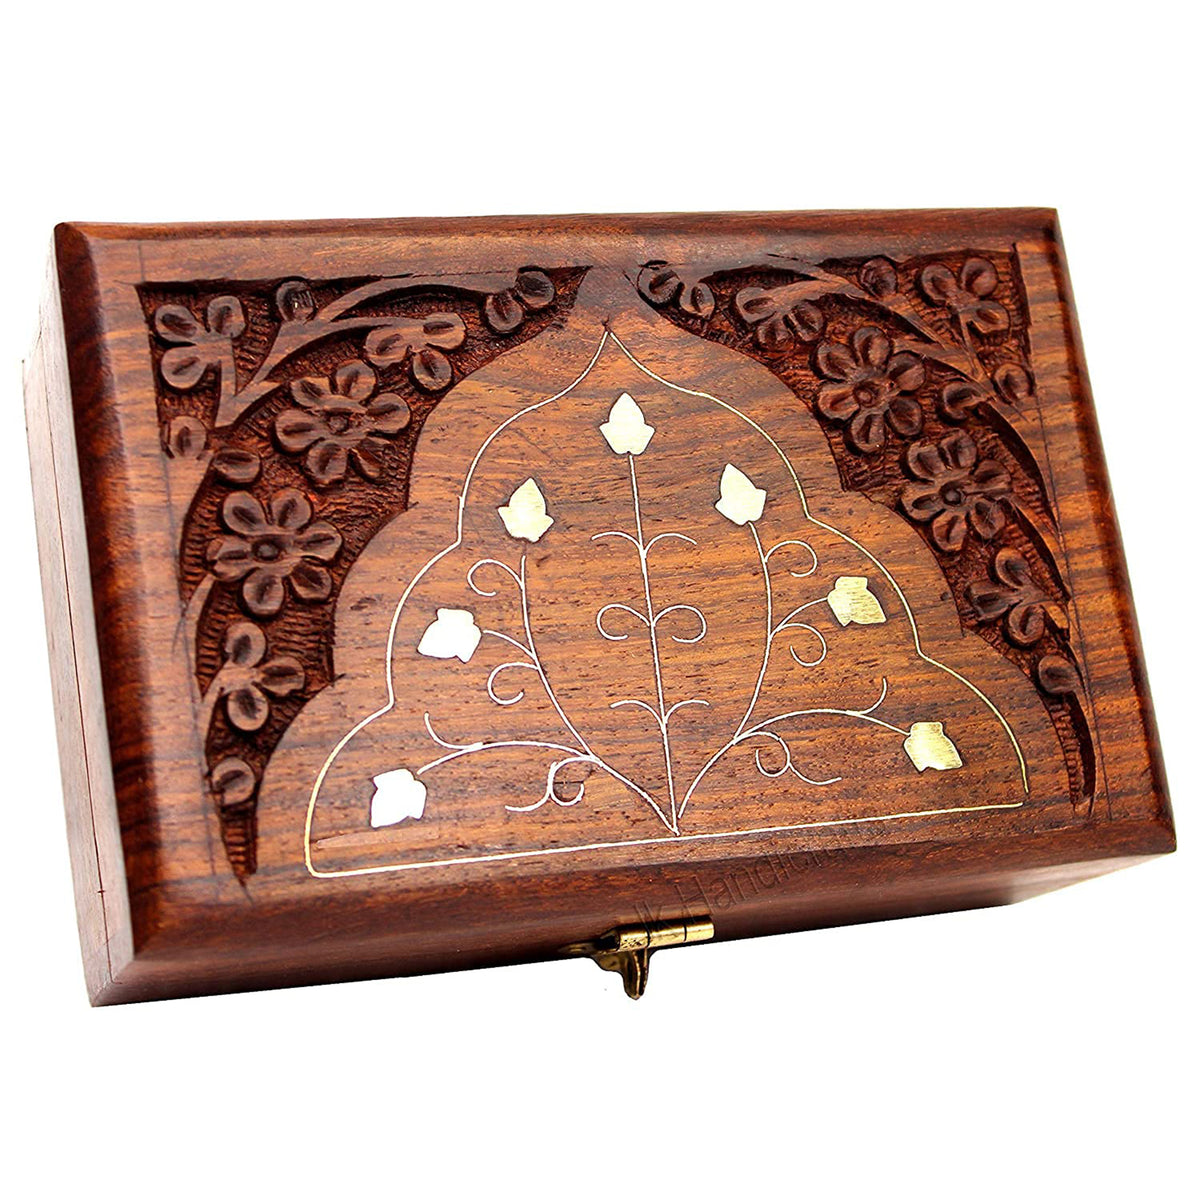 Handcrafted Wooden Box with Brass-Filled Lid - Perfect for Storing Your Jewelry